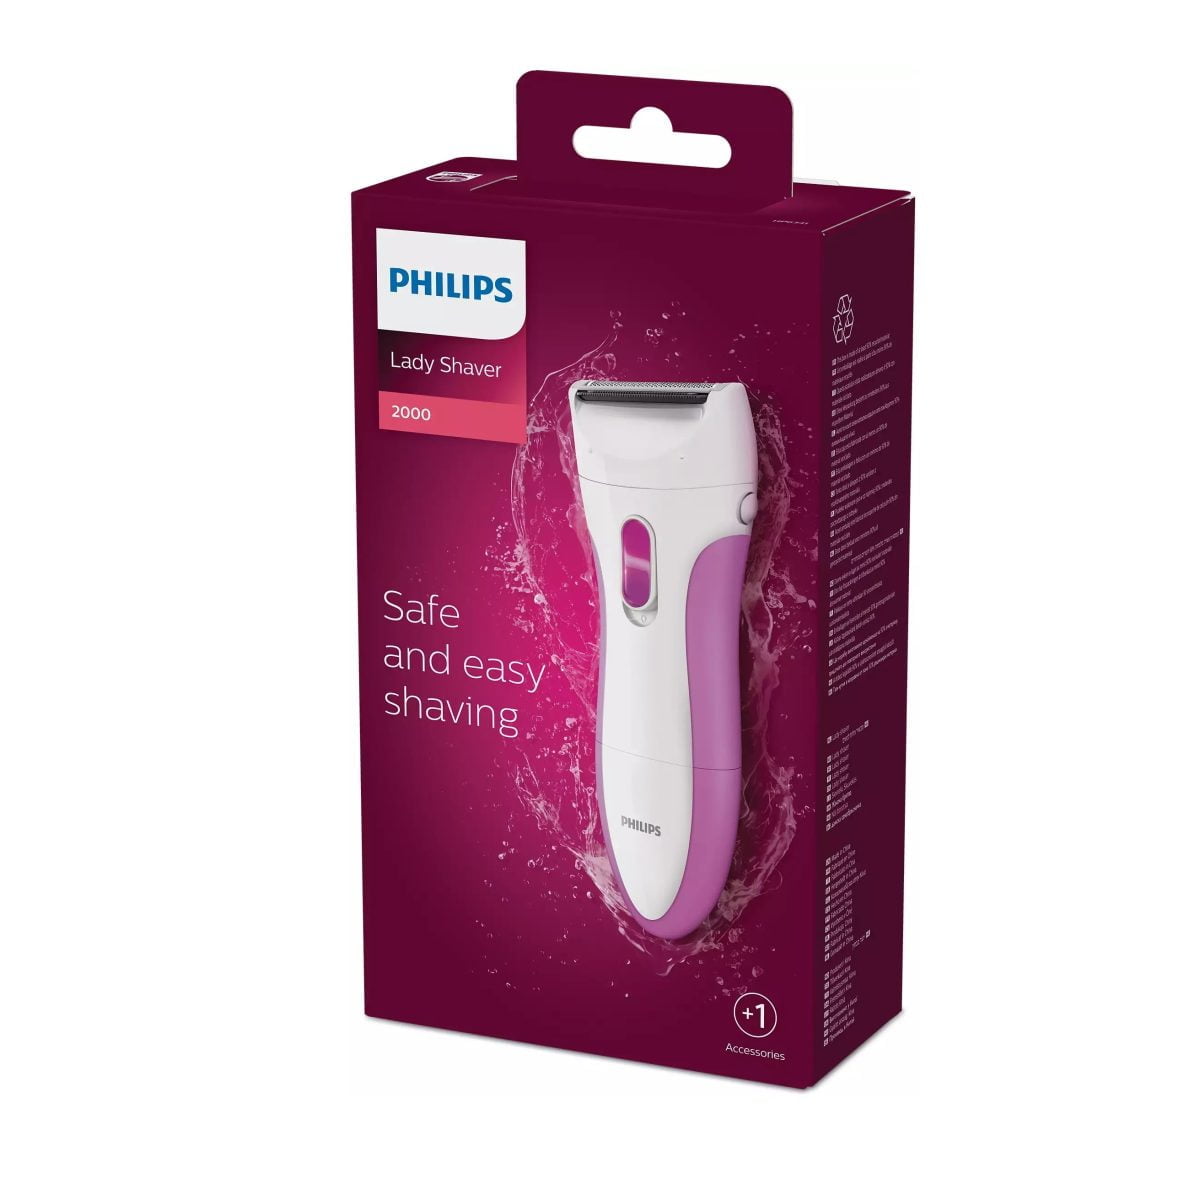 Philips Lady Shaver 2000 - Hp6341